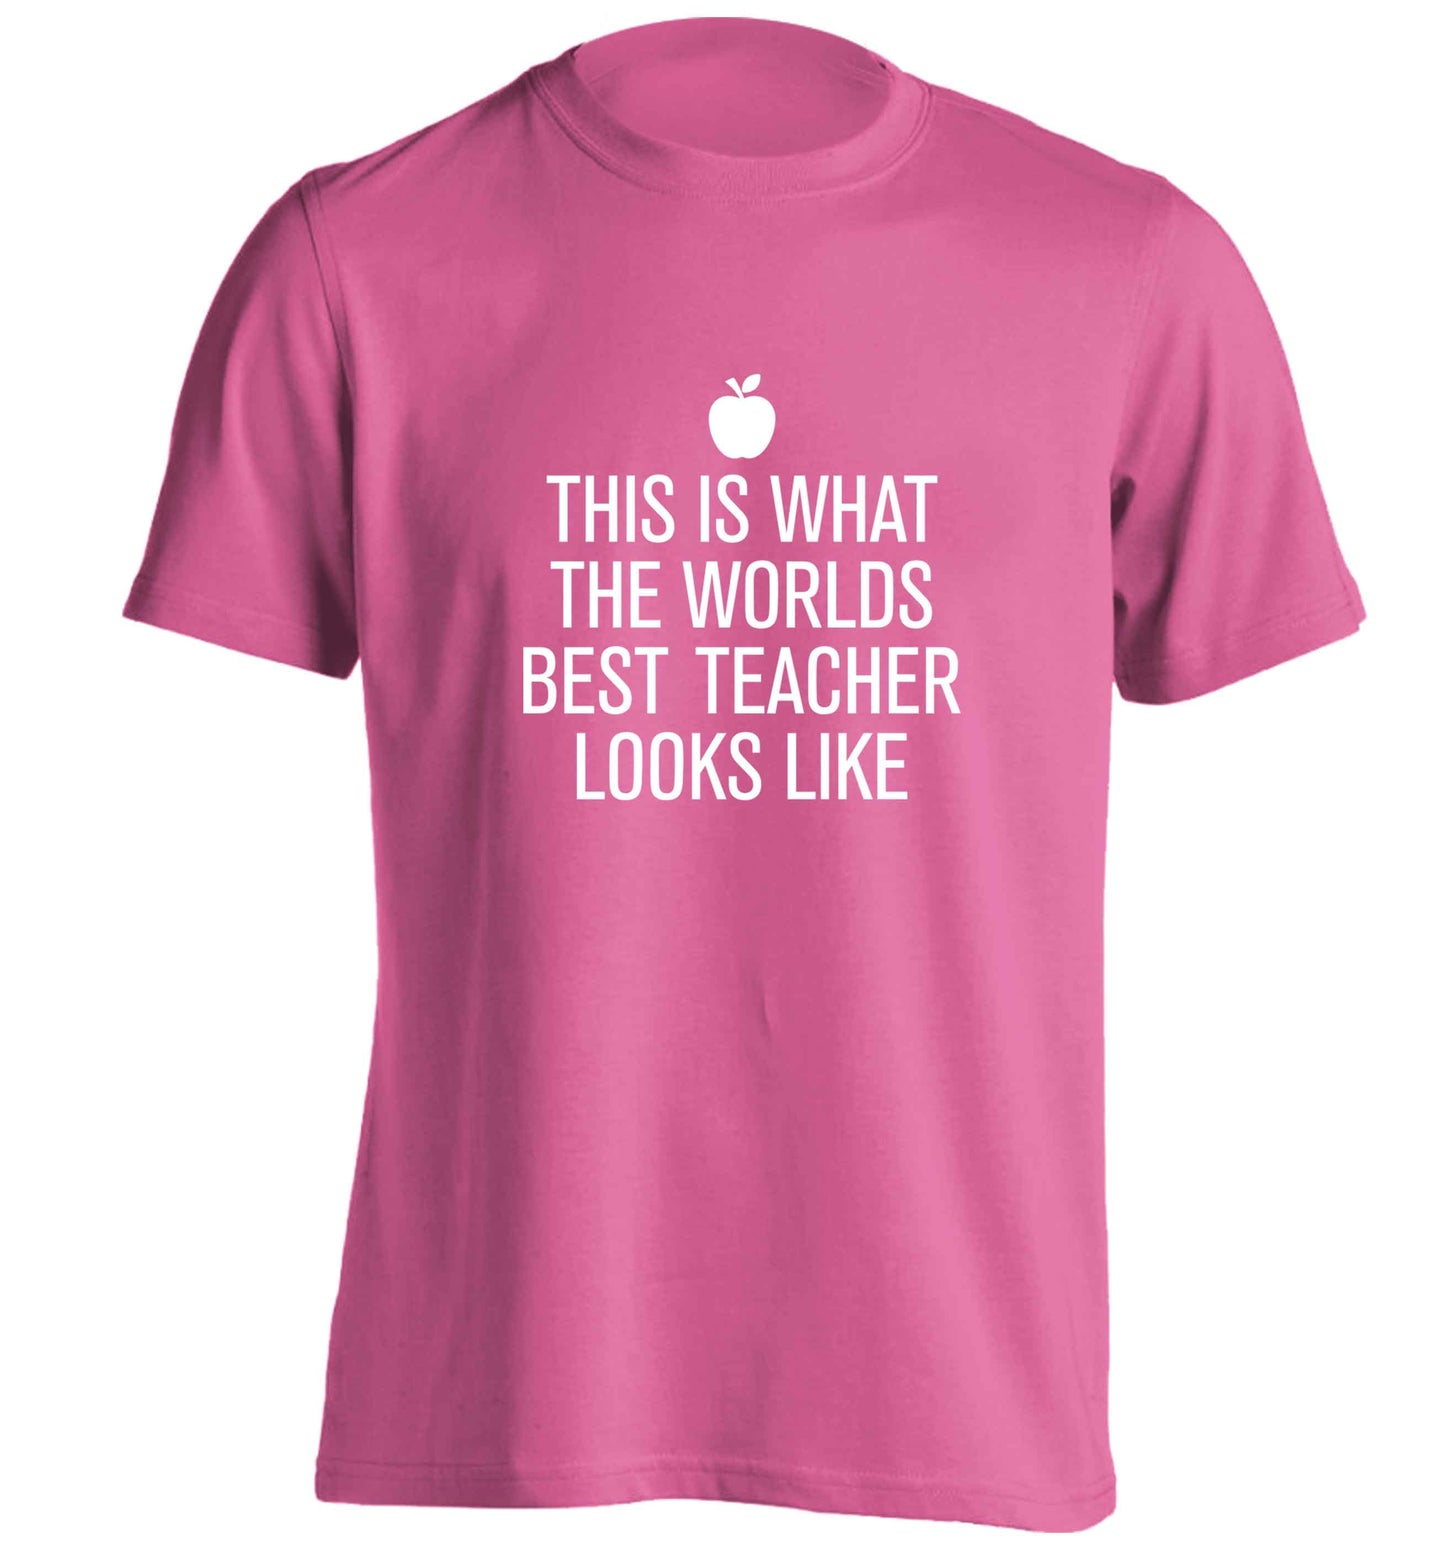 This is what the worlds best teacher looks like adults unisex pink Tshirt 2XL